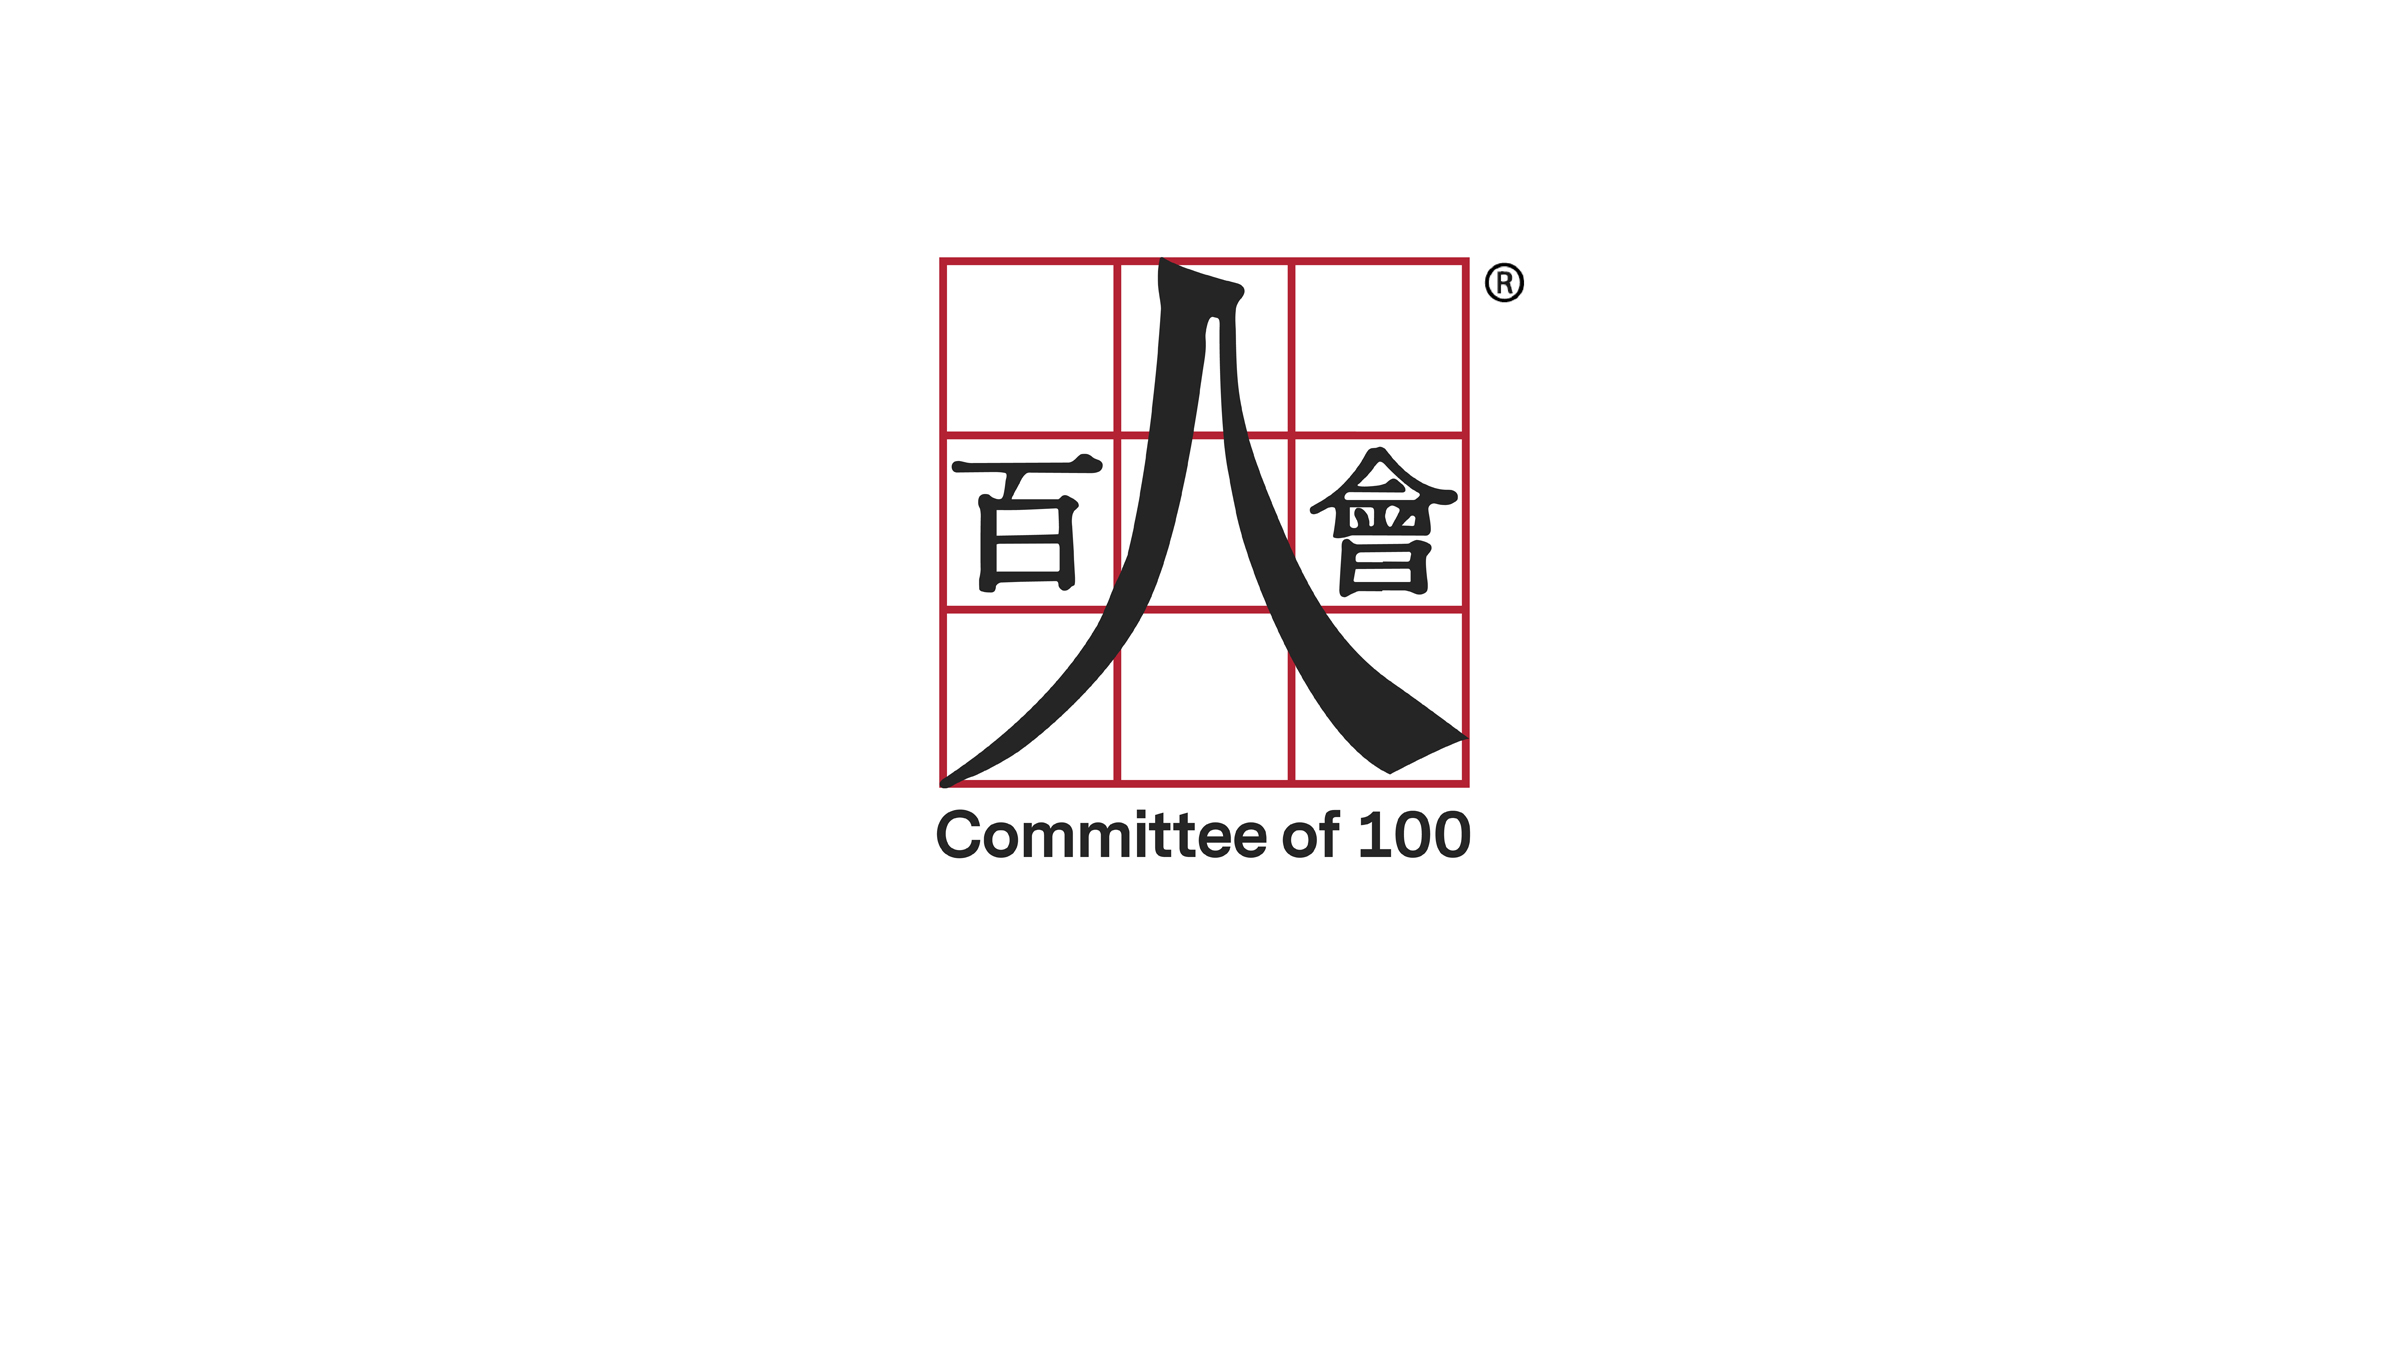 Committee of 100 Connects with Over 150 Groups, Universities and Organizations on Landmark Study of Chinese American Contributions